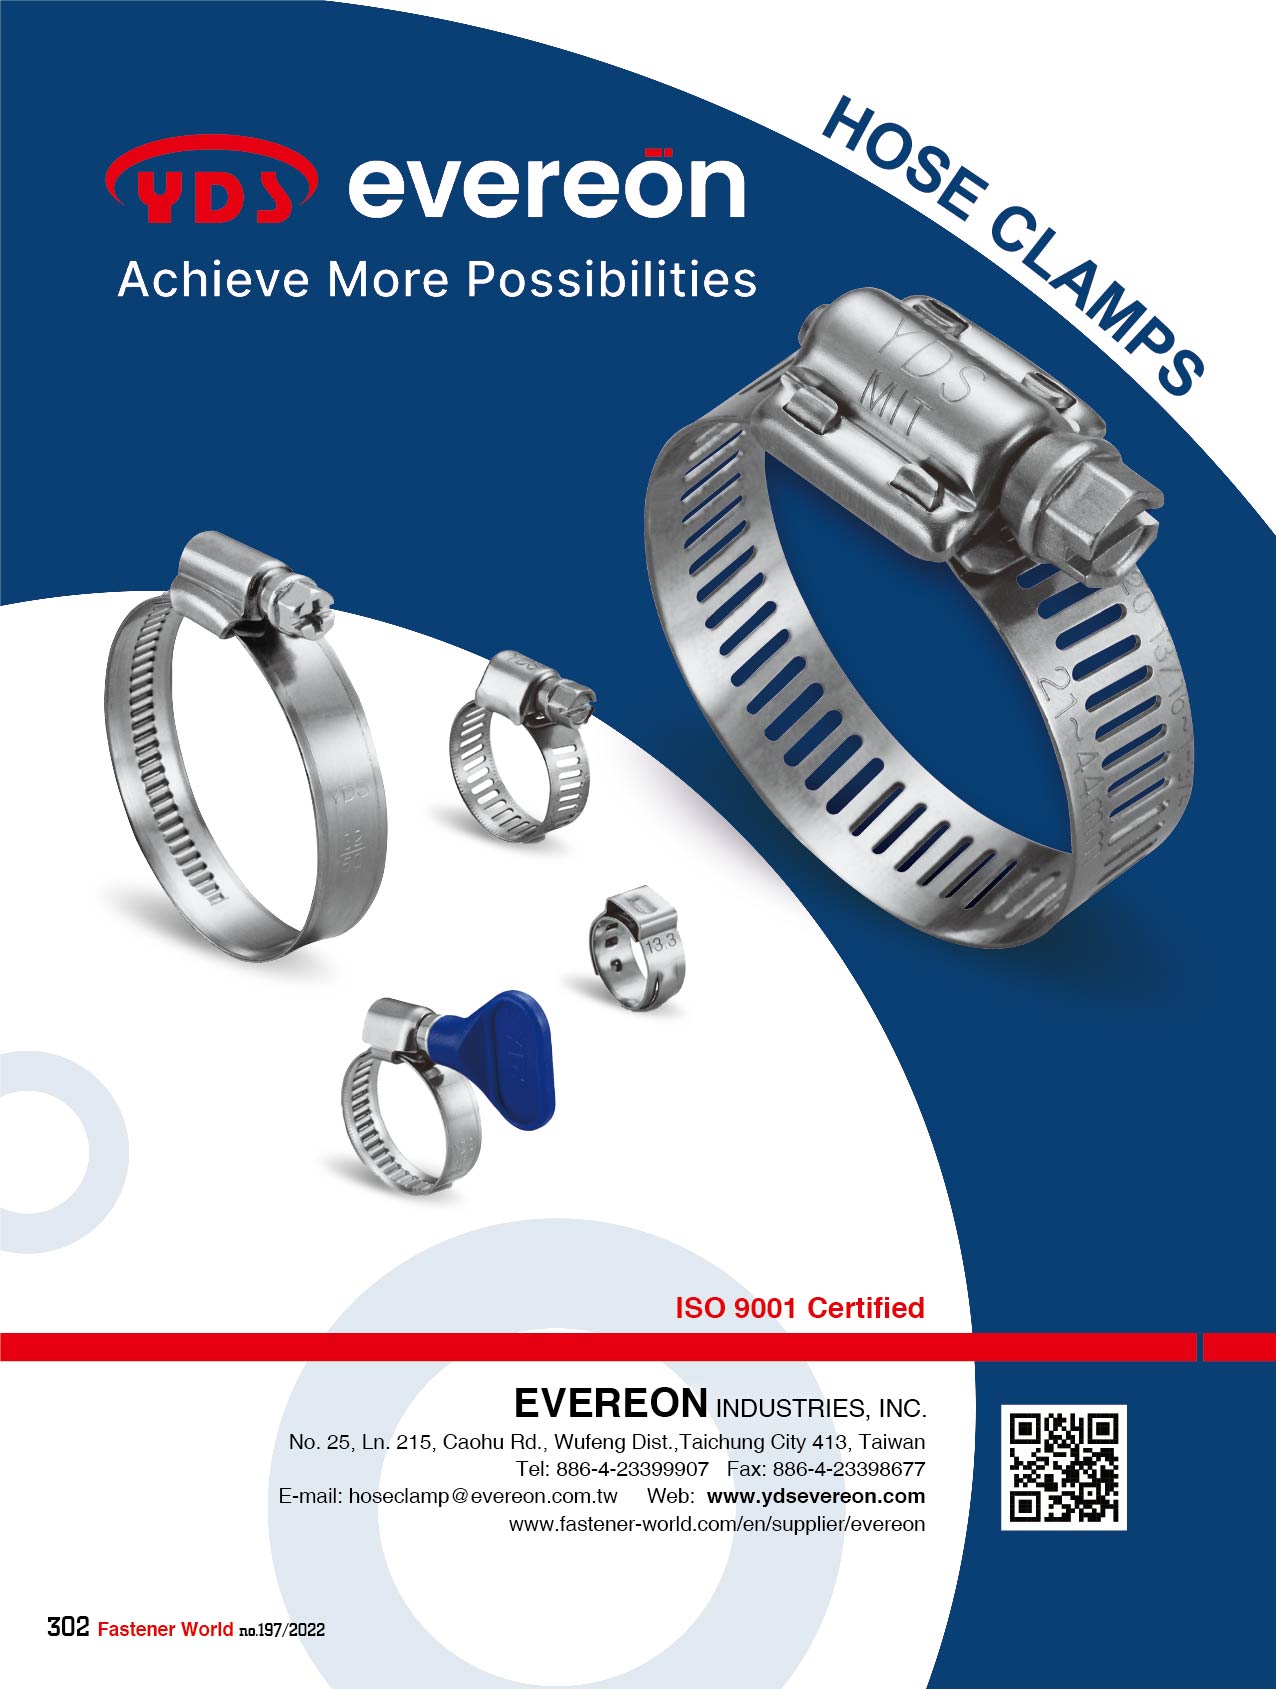 EVEREON INDUSTRIES, INC. , Hose Clamp, Clamp Rack, Ear Clamp, Free End Clamp, High Torque , Hose Clamps